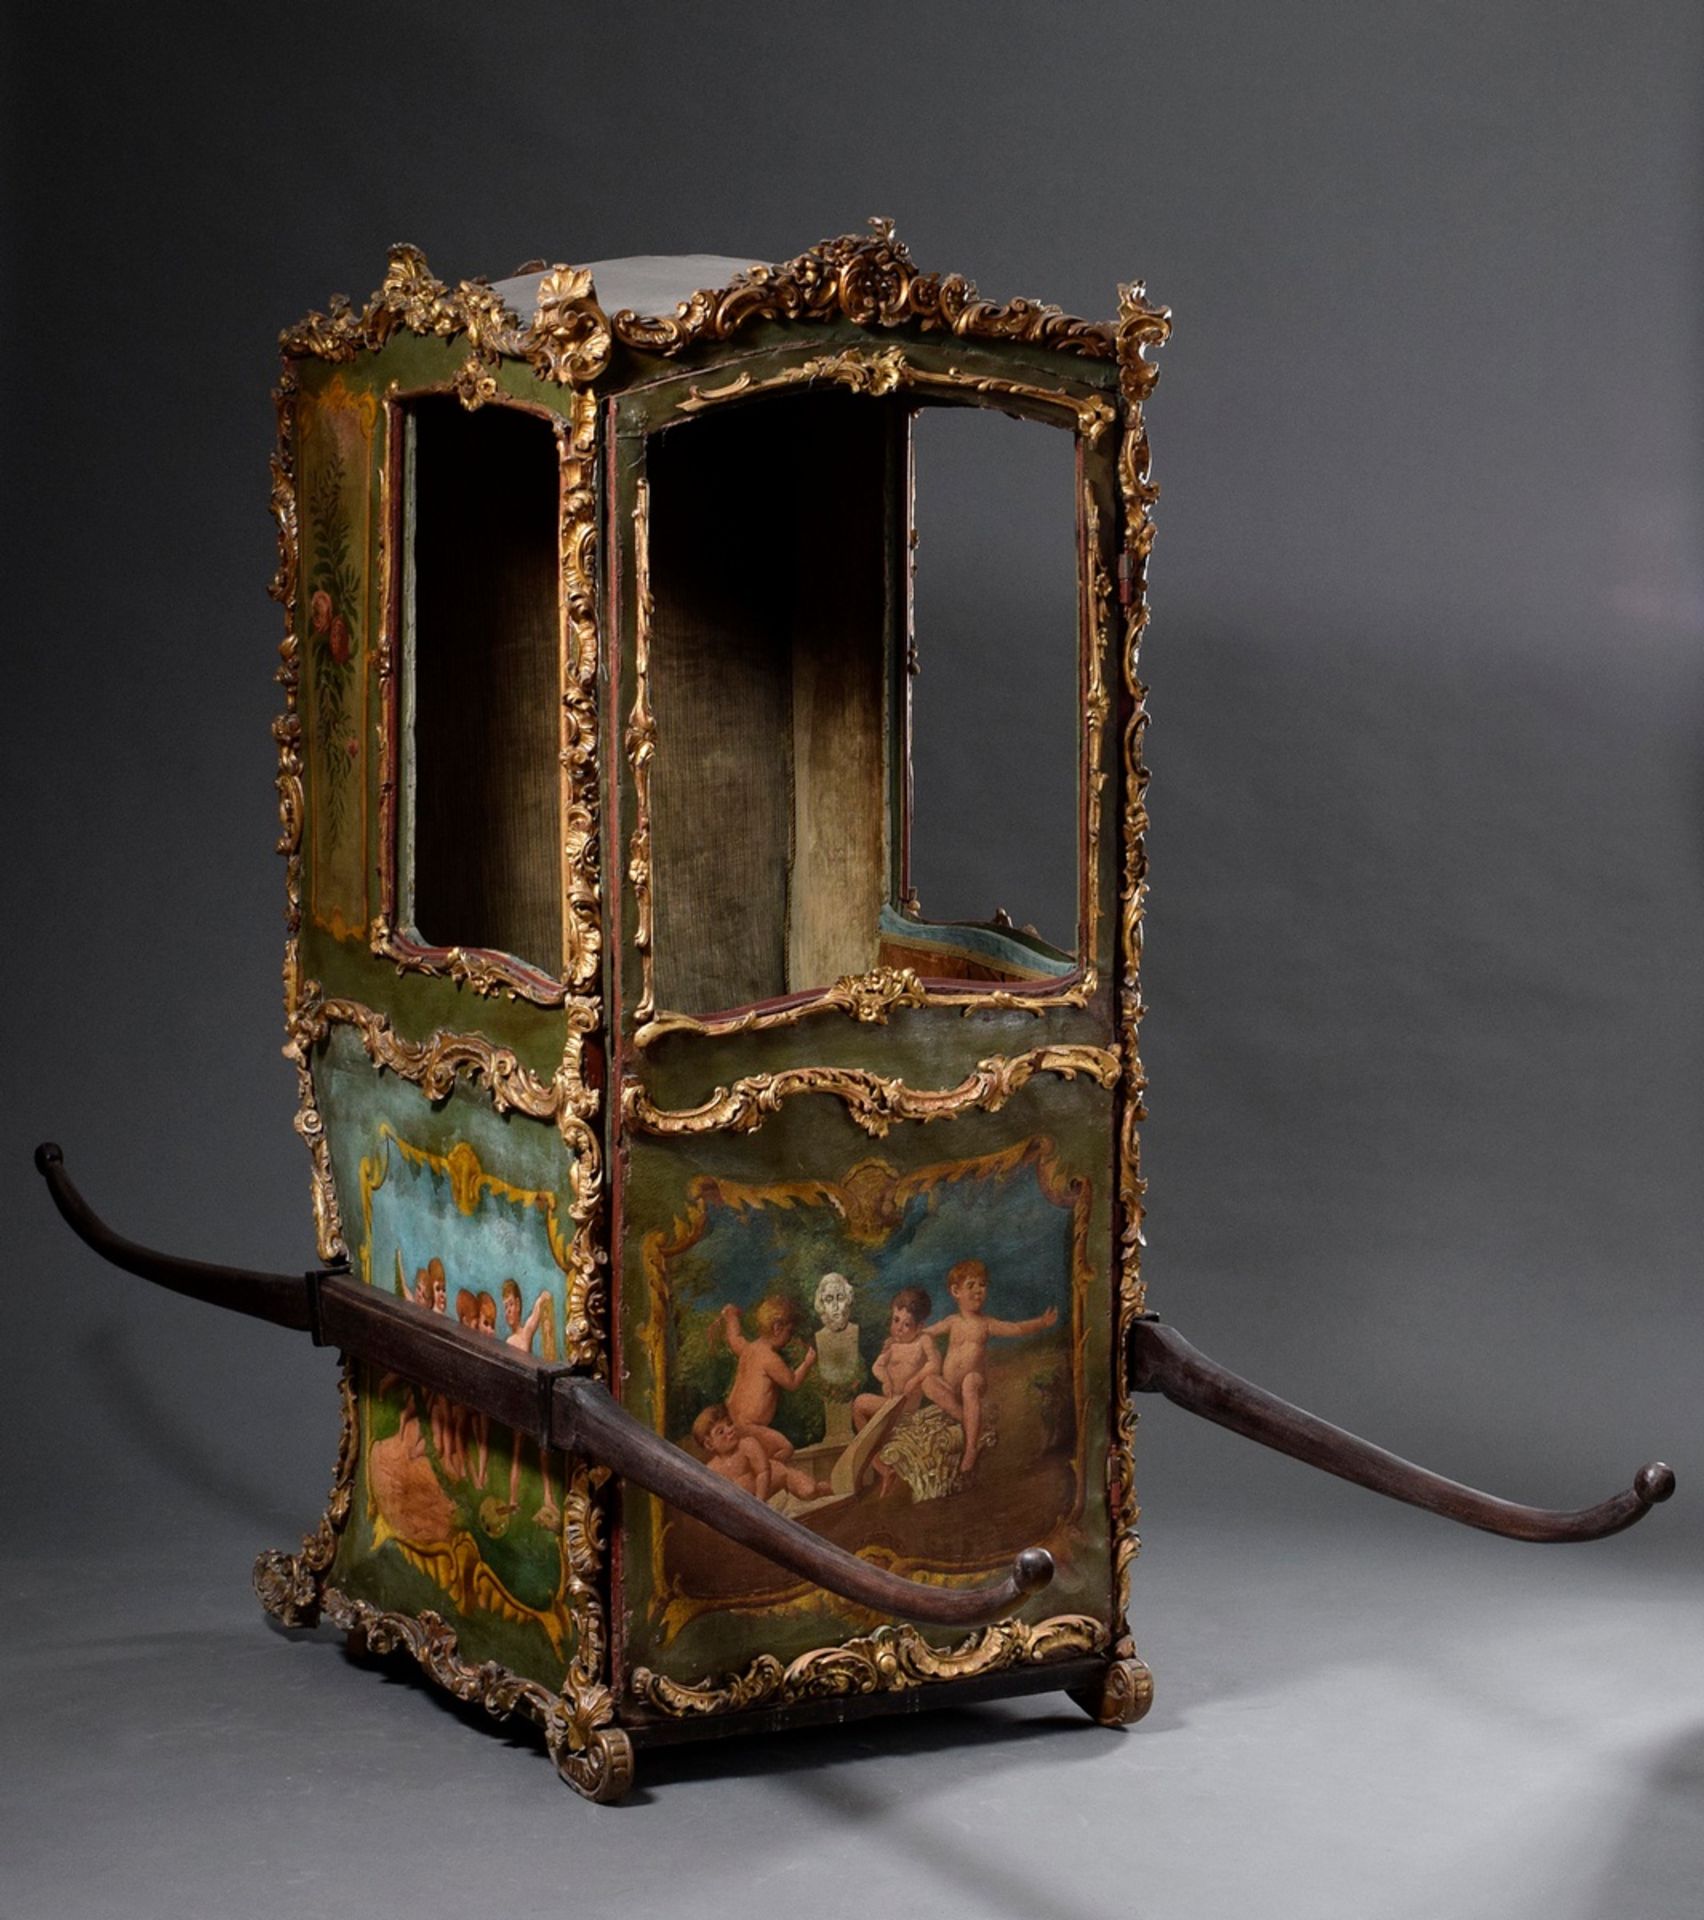 Rococo-style sedan chair with painted canvas covering "Putten-Allegorien" and carved rocaille mould - Image 2 of 15